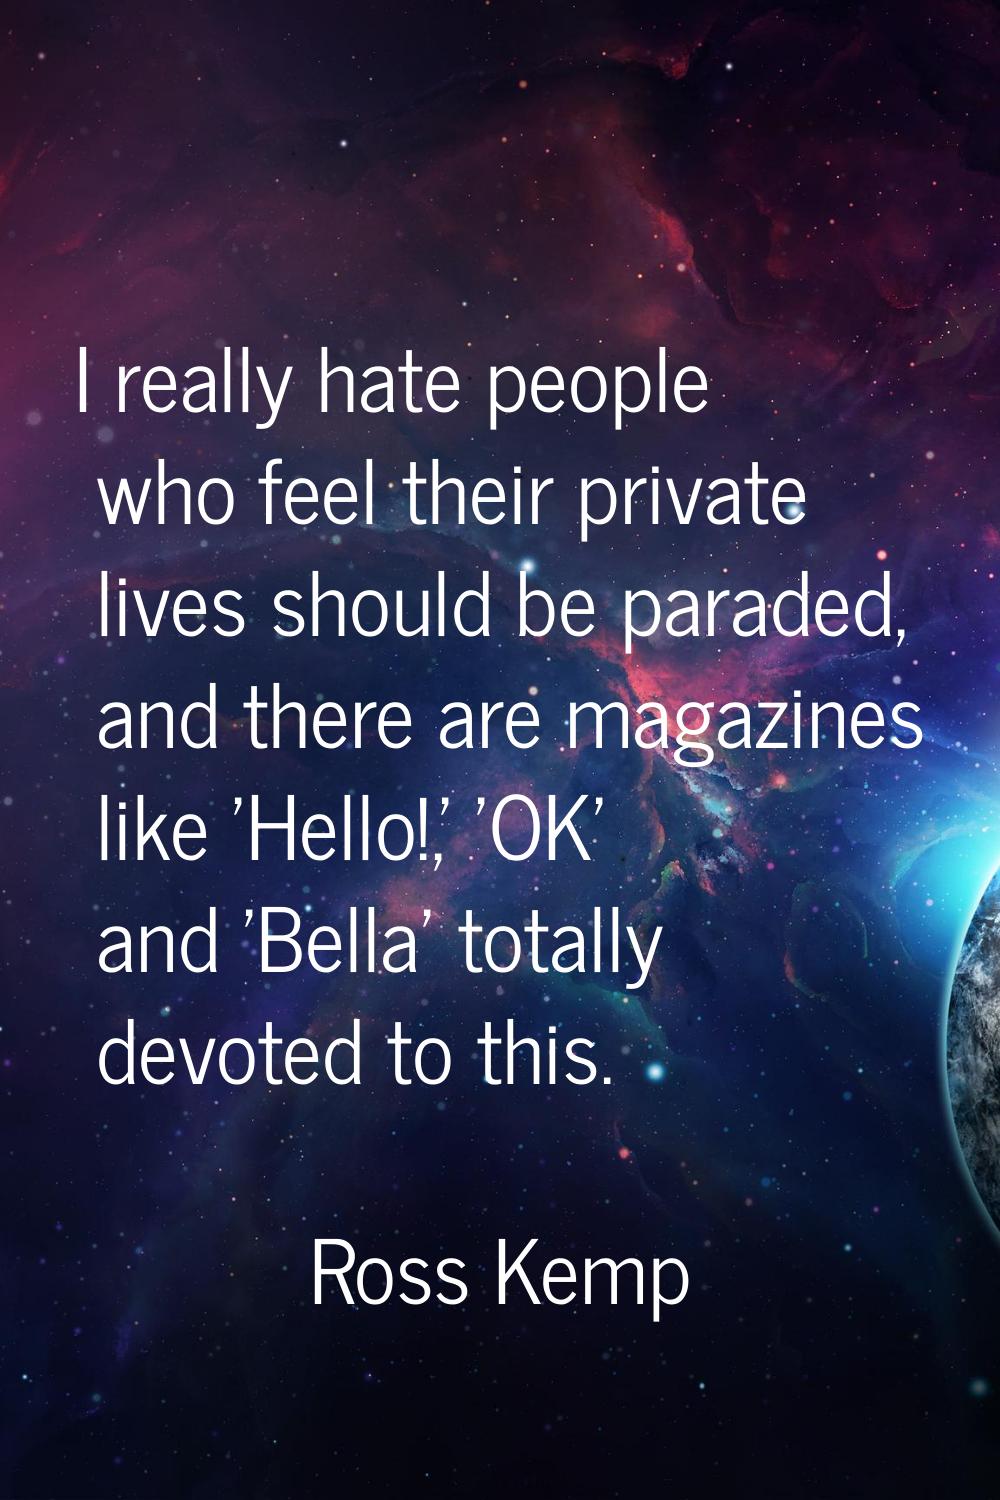 I really hate people who feel their private lives should be paraded, and there are magazines like '